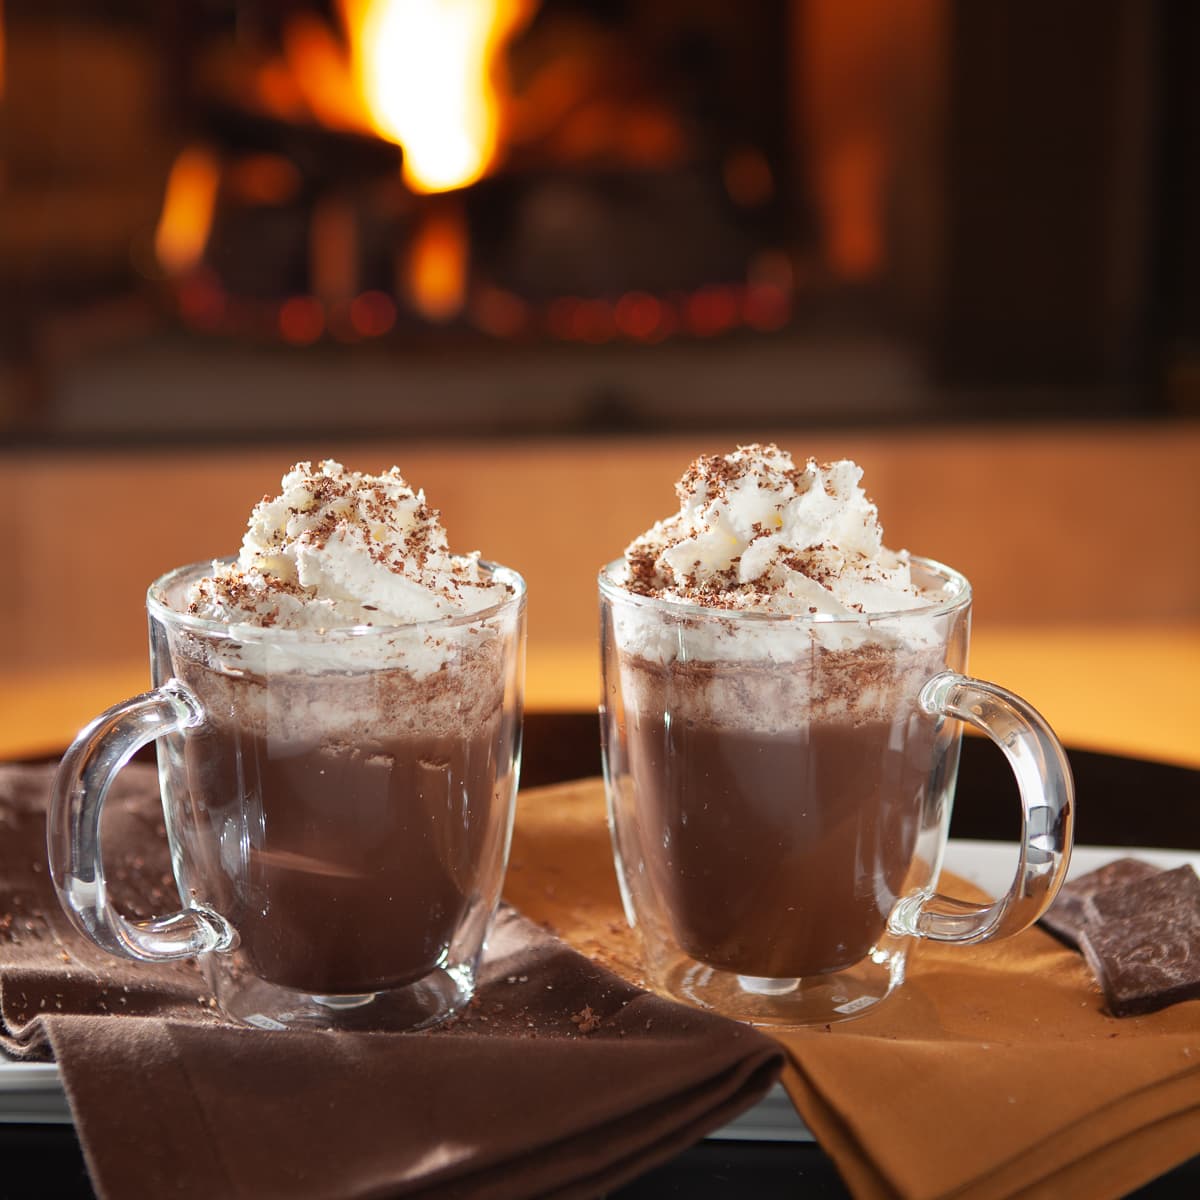 Hot chocolate with whipped cream topping in front of a fireplace.